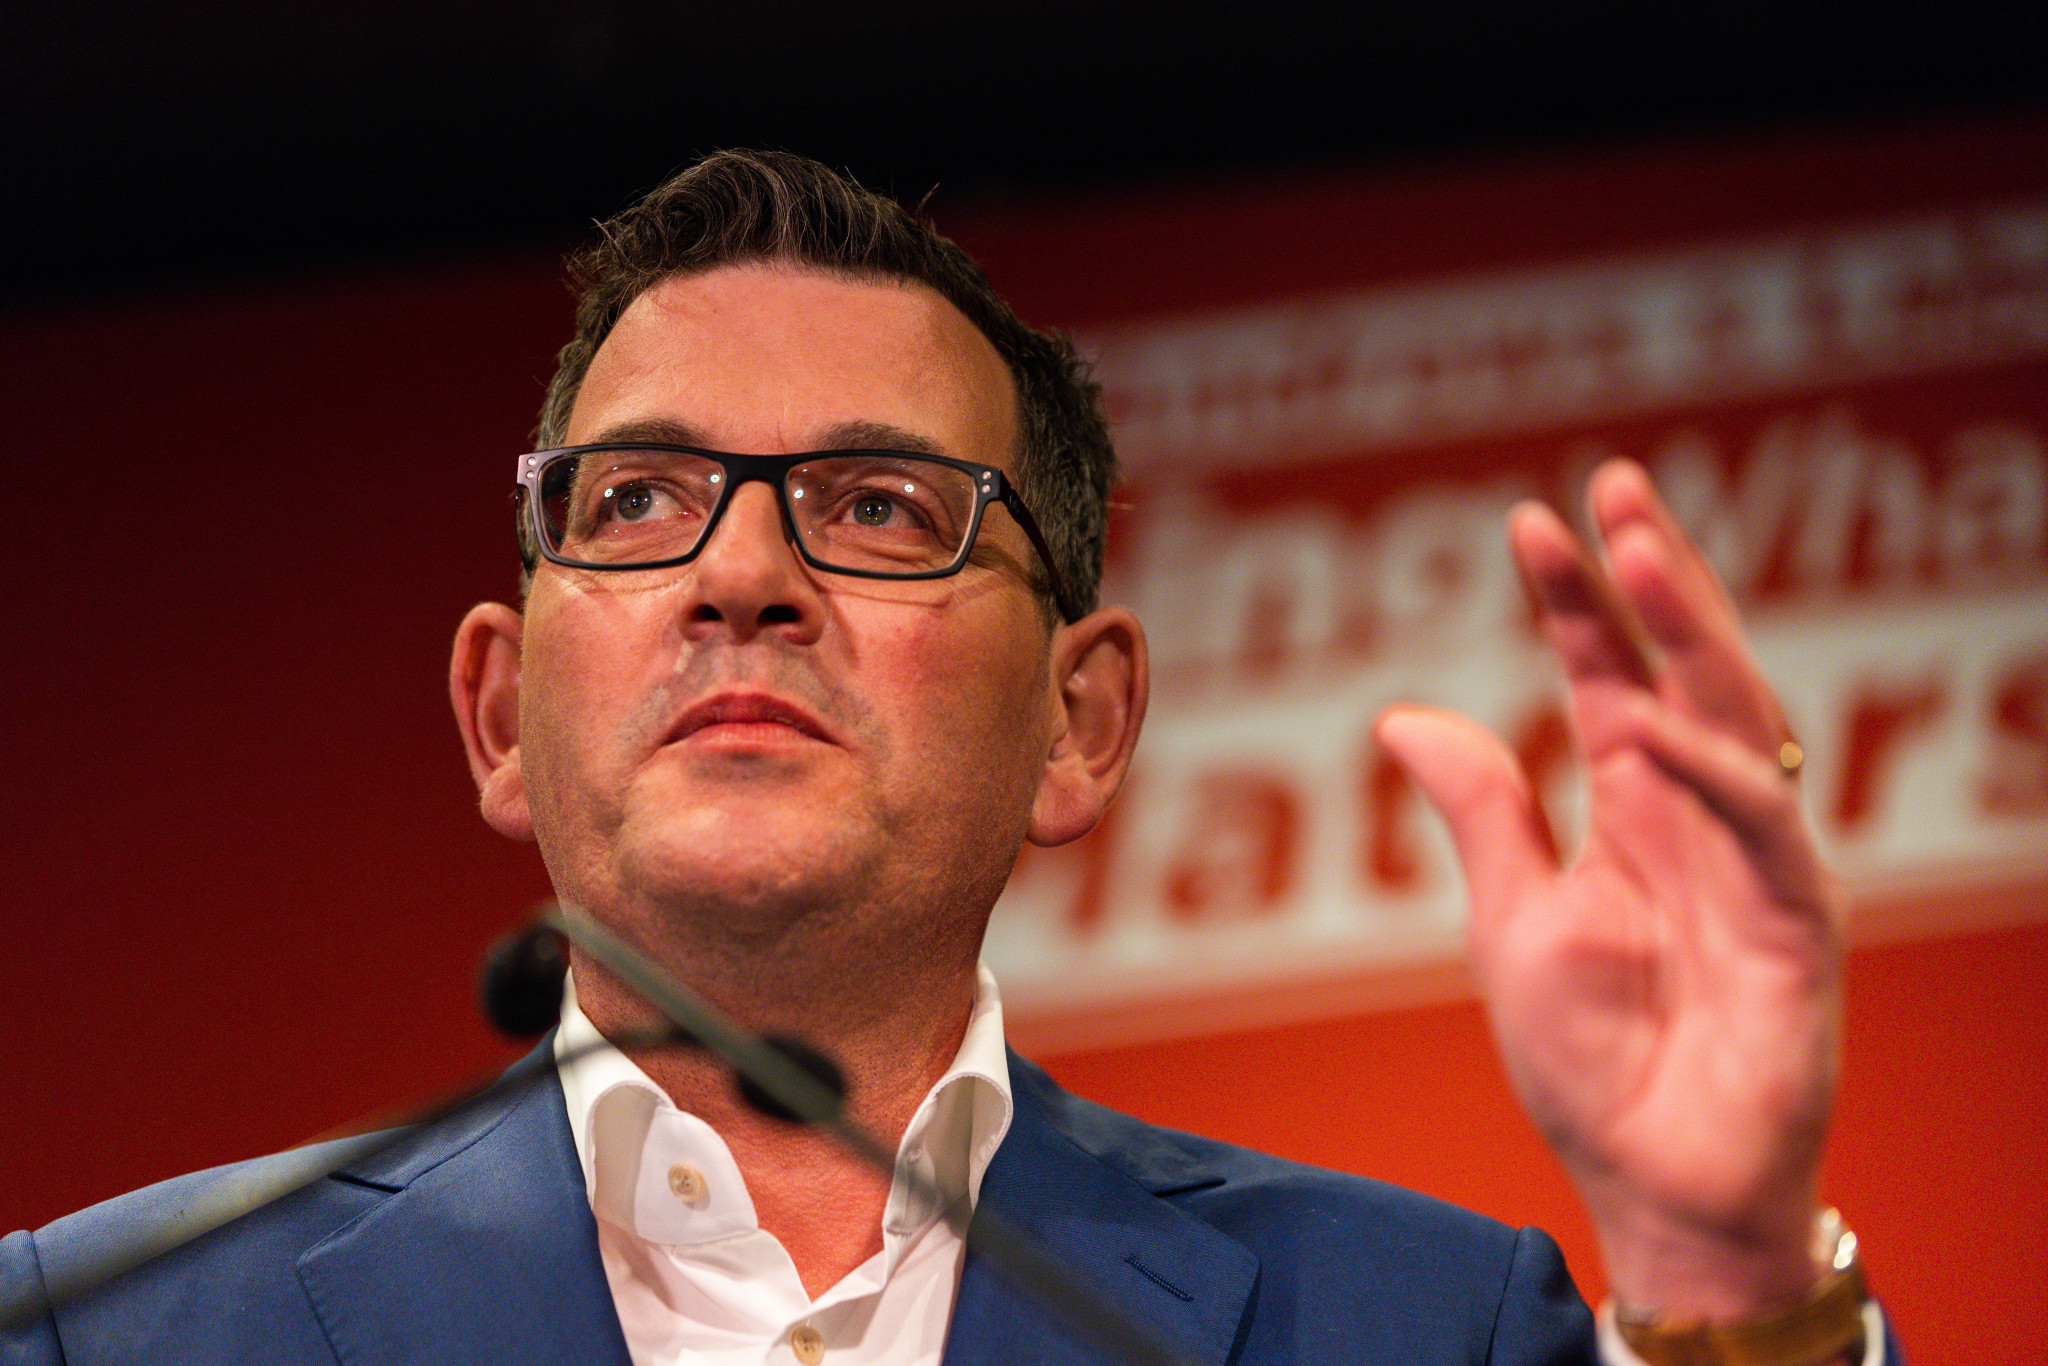 Victoria Premier Daniel Andrews has insisted the costs of the 2026 Commonwealth Games outweighed the benefits, but refused to appear before a Senate inquiry into the cancellation ©Getty Images